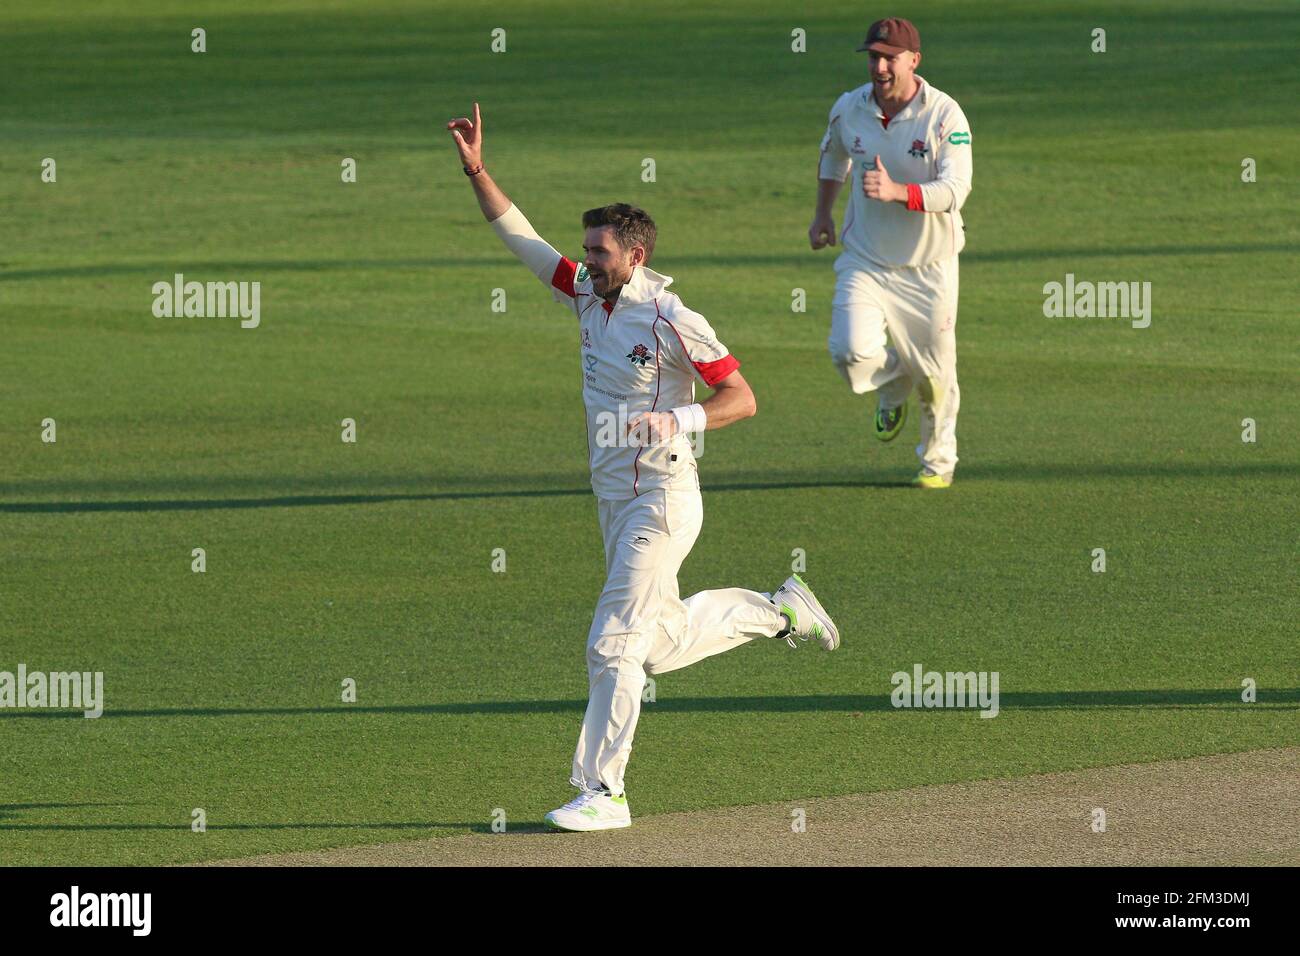 Jimmy Anderson of Lancashire celebrates taking the wicket of Aaron Beard during Essex CCC vs Lancashire CCC, Specsavers County Championship Division 1 Stock Photo